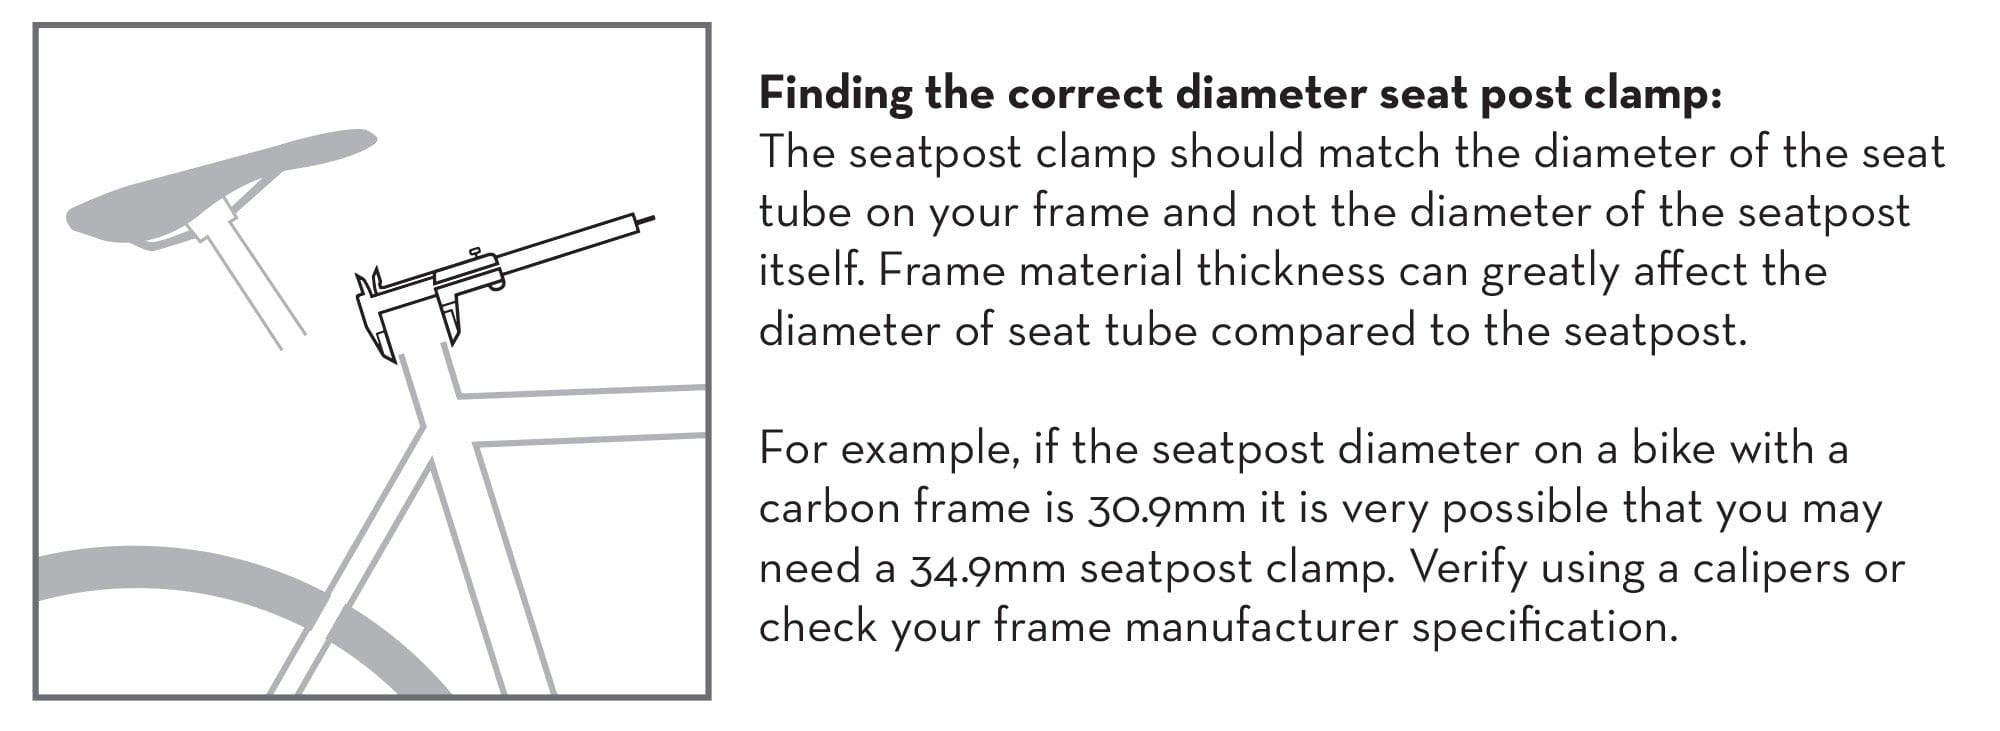 Instructions on how to find the correct diameter for installing a seatpost clamp.